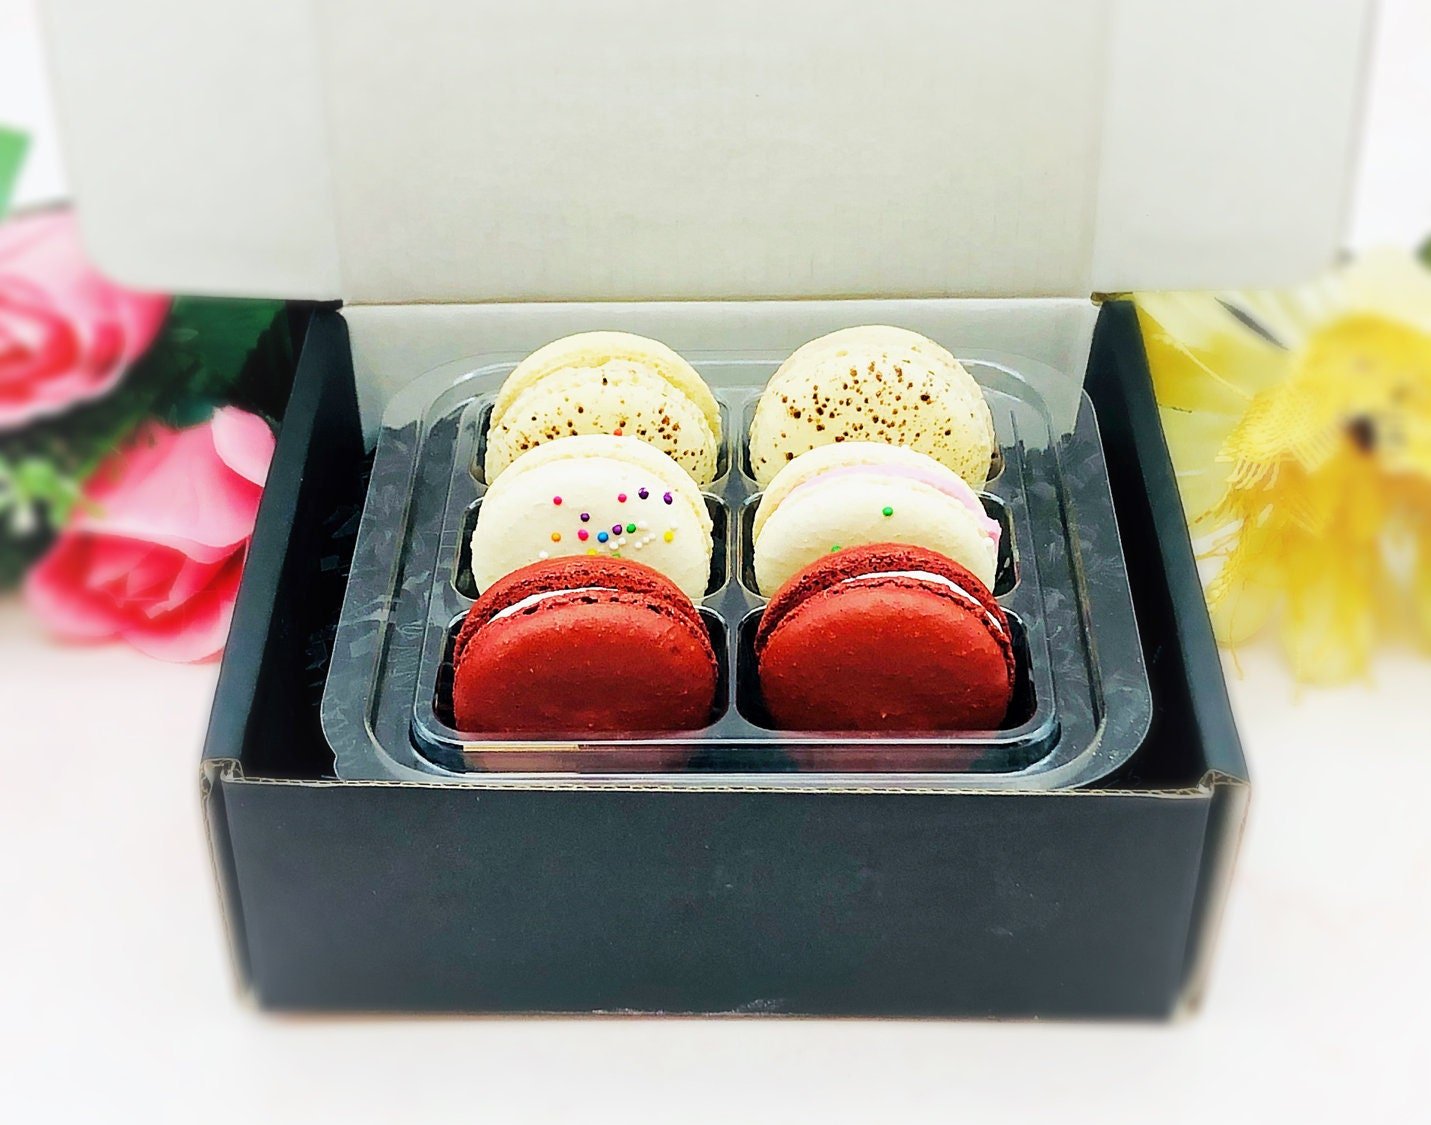 6 Pack Happy Birthday Macaron Set | a perfect gift for the birthday occasion - Macaron CentraleBerries Set